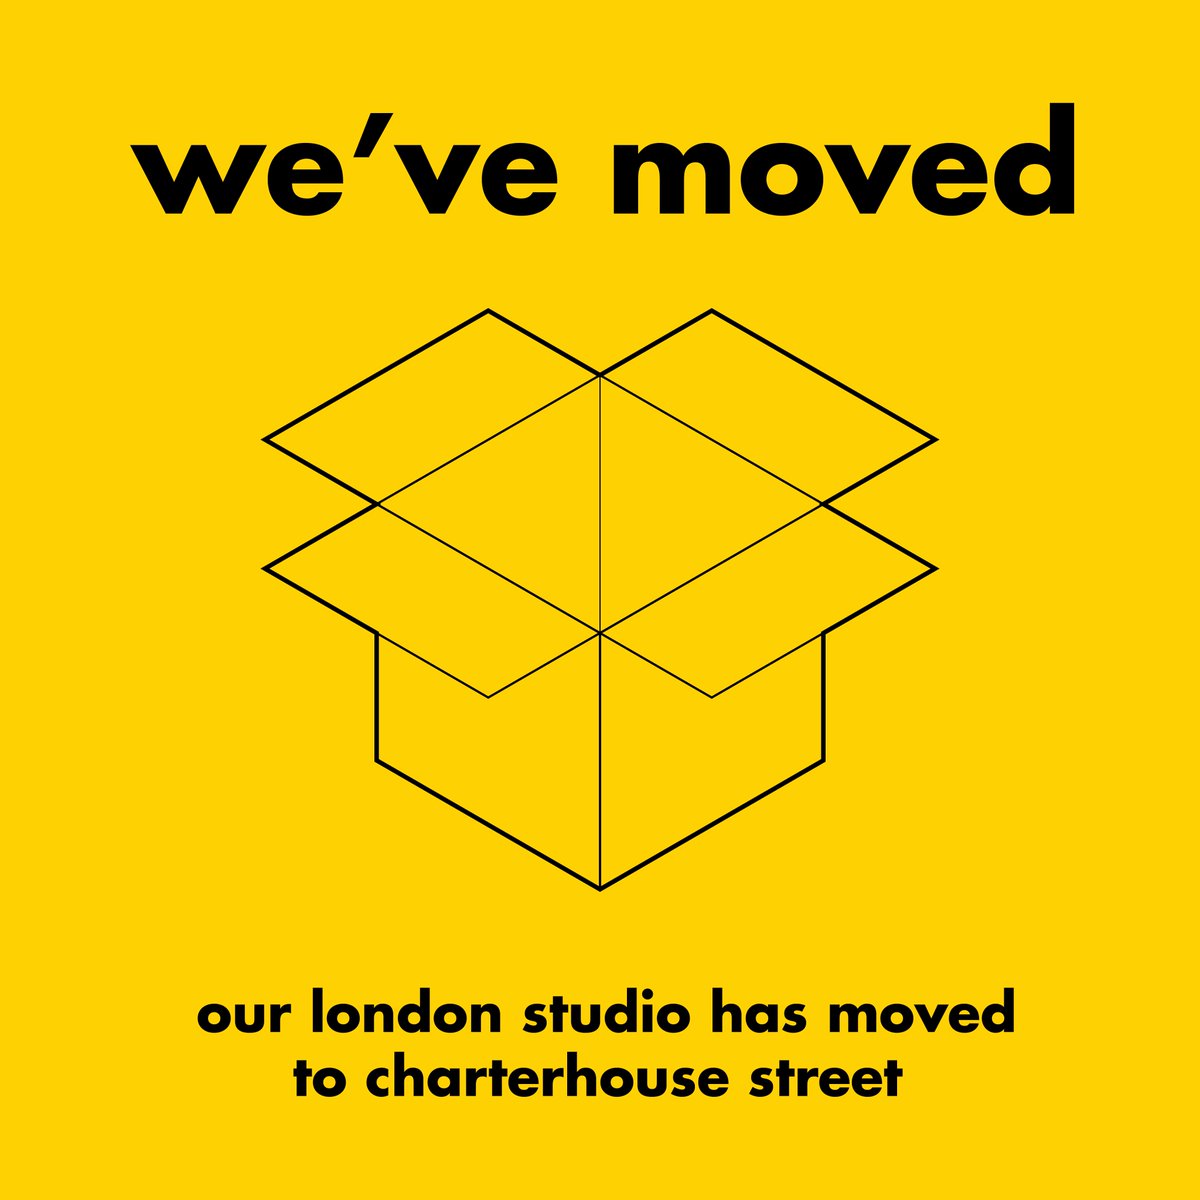 our london team are moving to an exciting new premises! you can find us at our new and improved home at 40-42 charterhouse street, barbican, london EC1M 6JN. we look forward to welcoming clients and colleagues to see our new space soon. shedkm.co.uk #studiomove